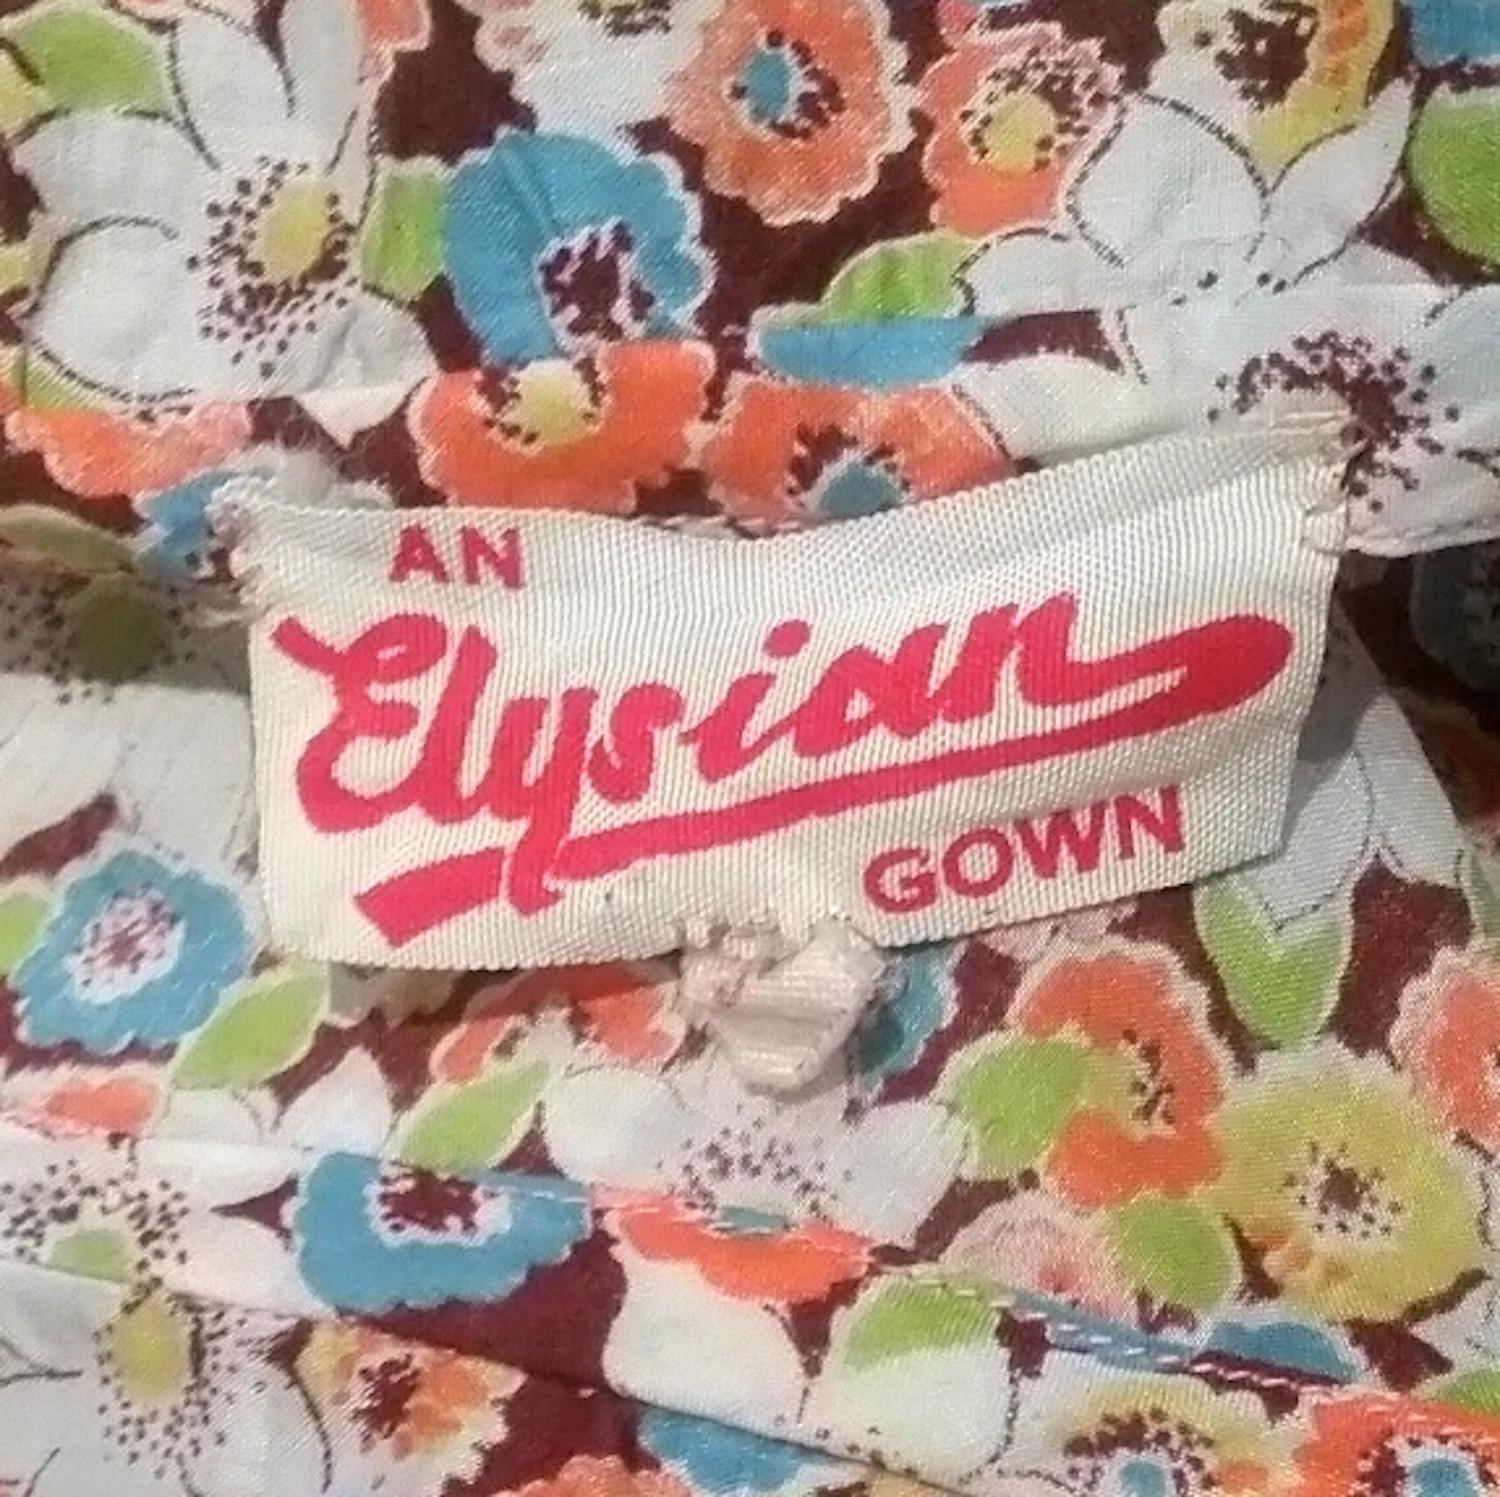 1950s Elysian Floral Cotton Dress With Asymmetrical Neckline and Peplum 1